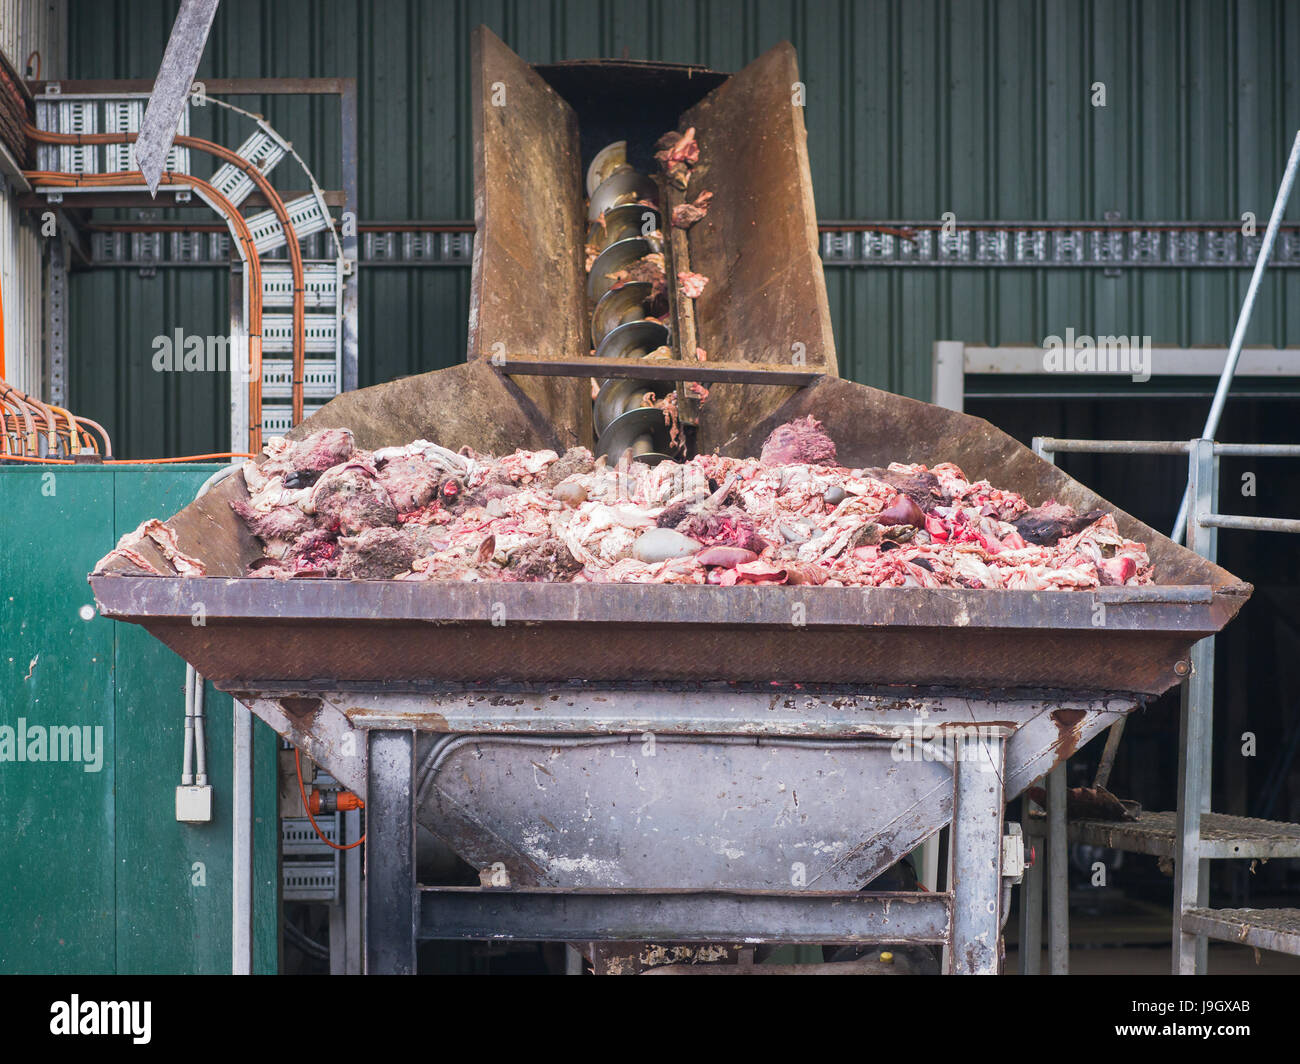 Byproducts from a sheep abattoir in the input bin of a meat and bone ...